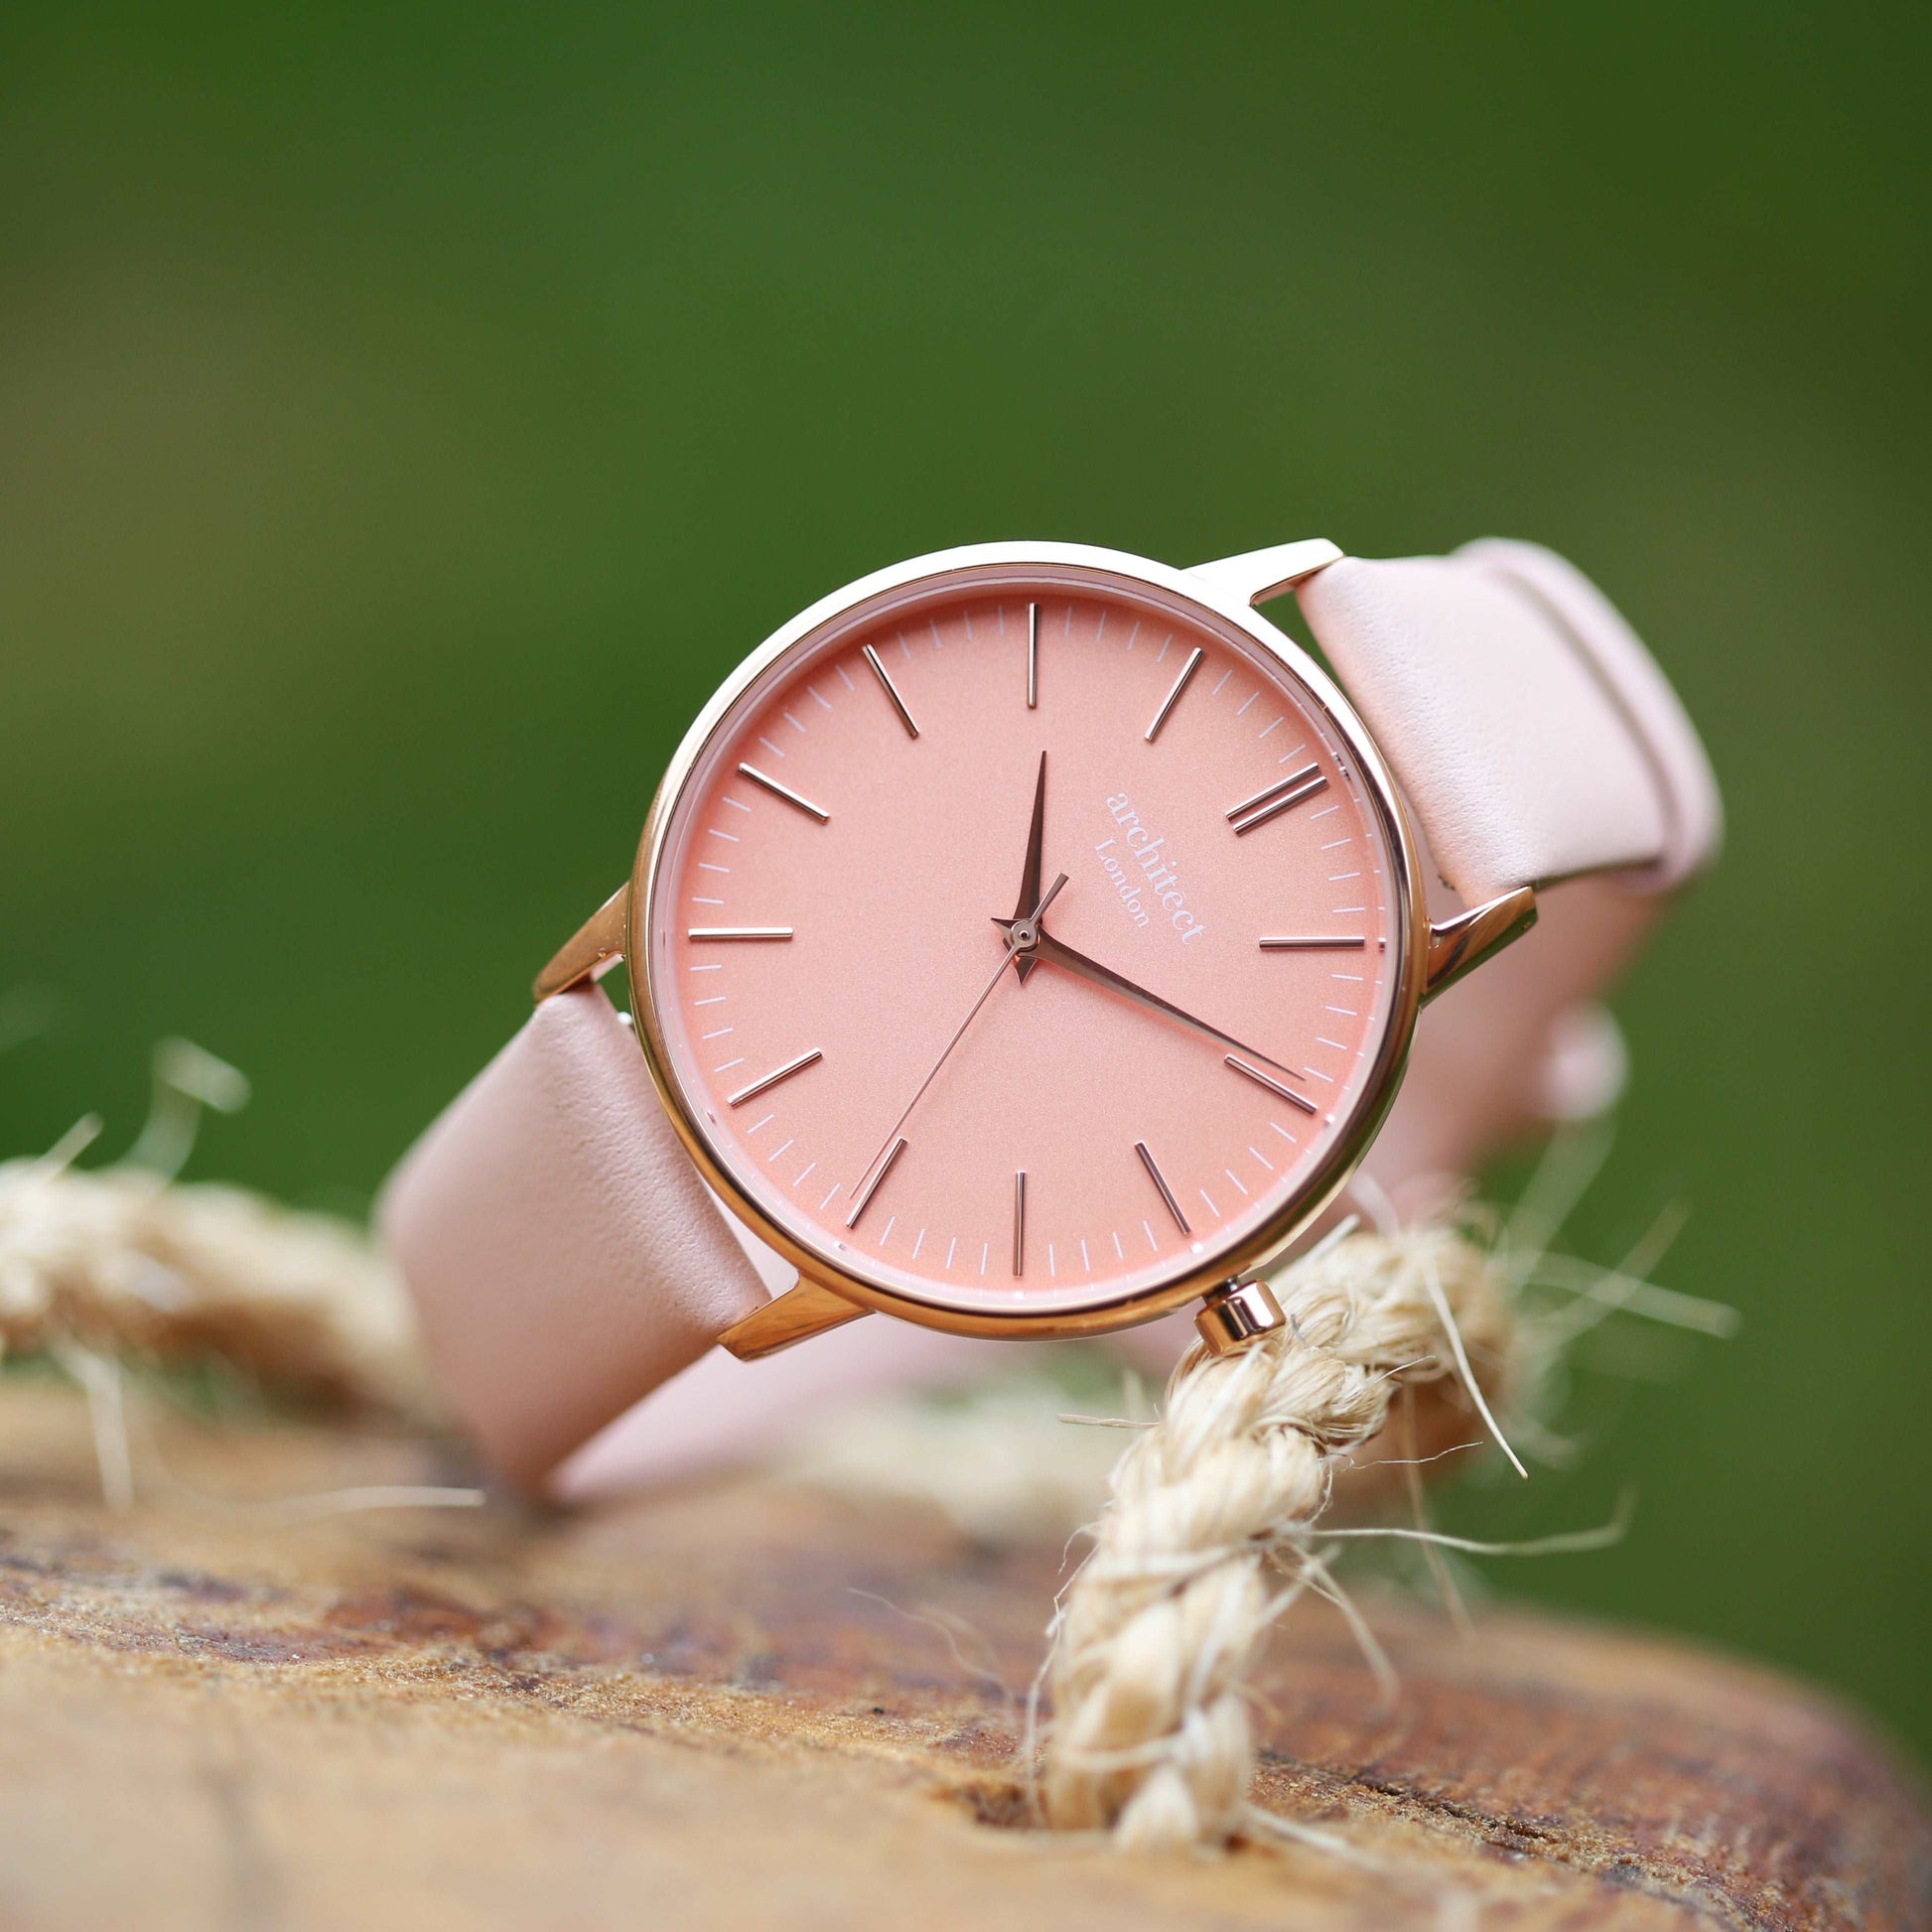 Personalized Ladies' Watches - Architect Coral Engraved Watch In Light Pink 